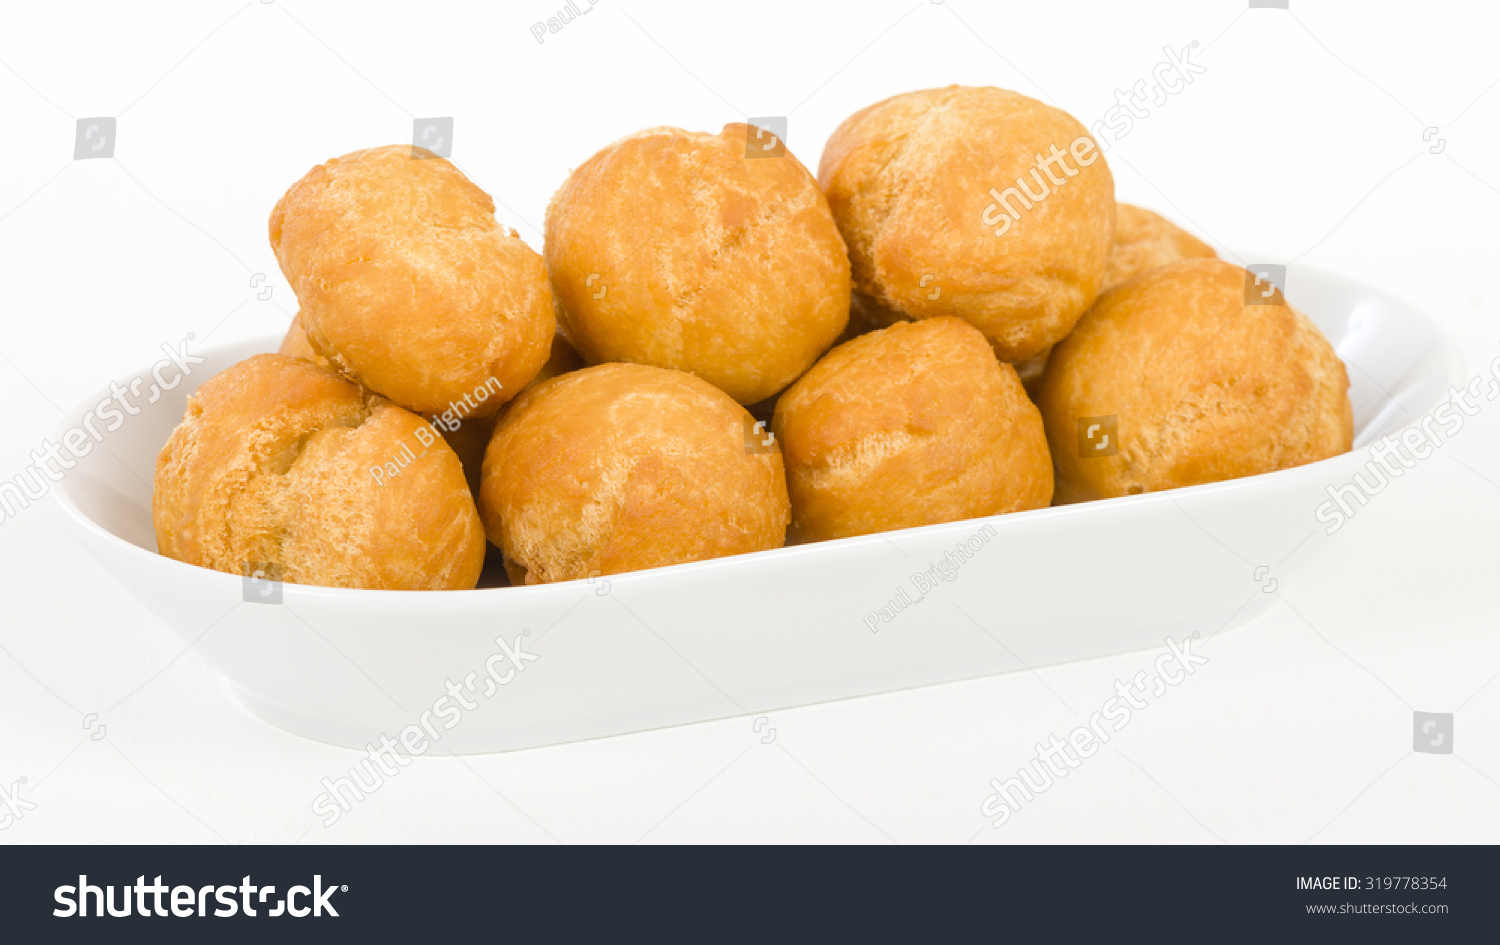 Johnny Cakes Jamaican Fried Dumplings White Miscellaneous Stock Image 319778354,How To Cut Peaches